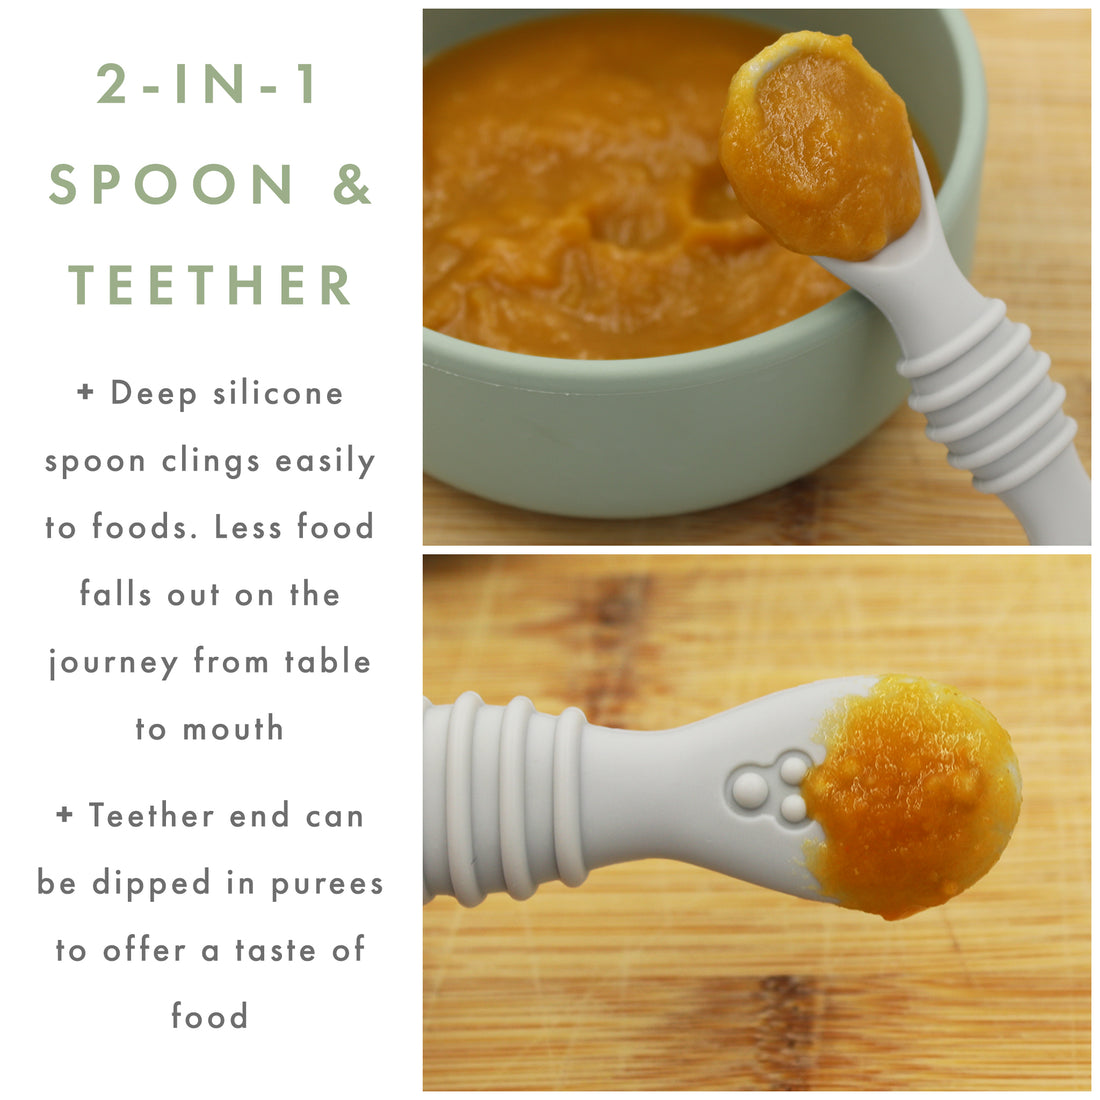 Stage 2: Toddler Spoons (Set of 2)